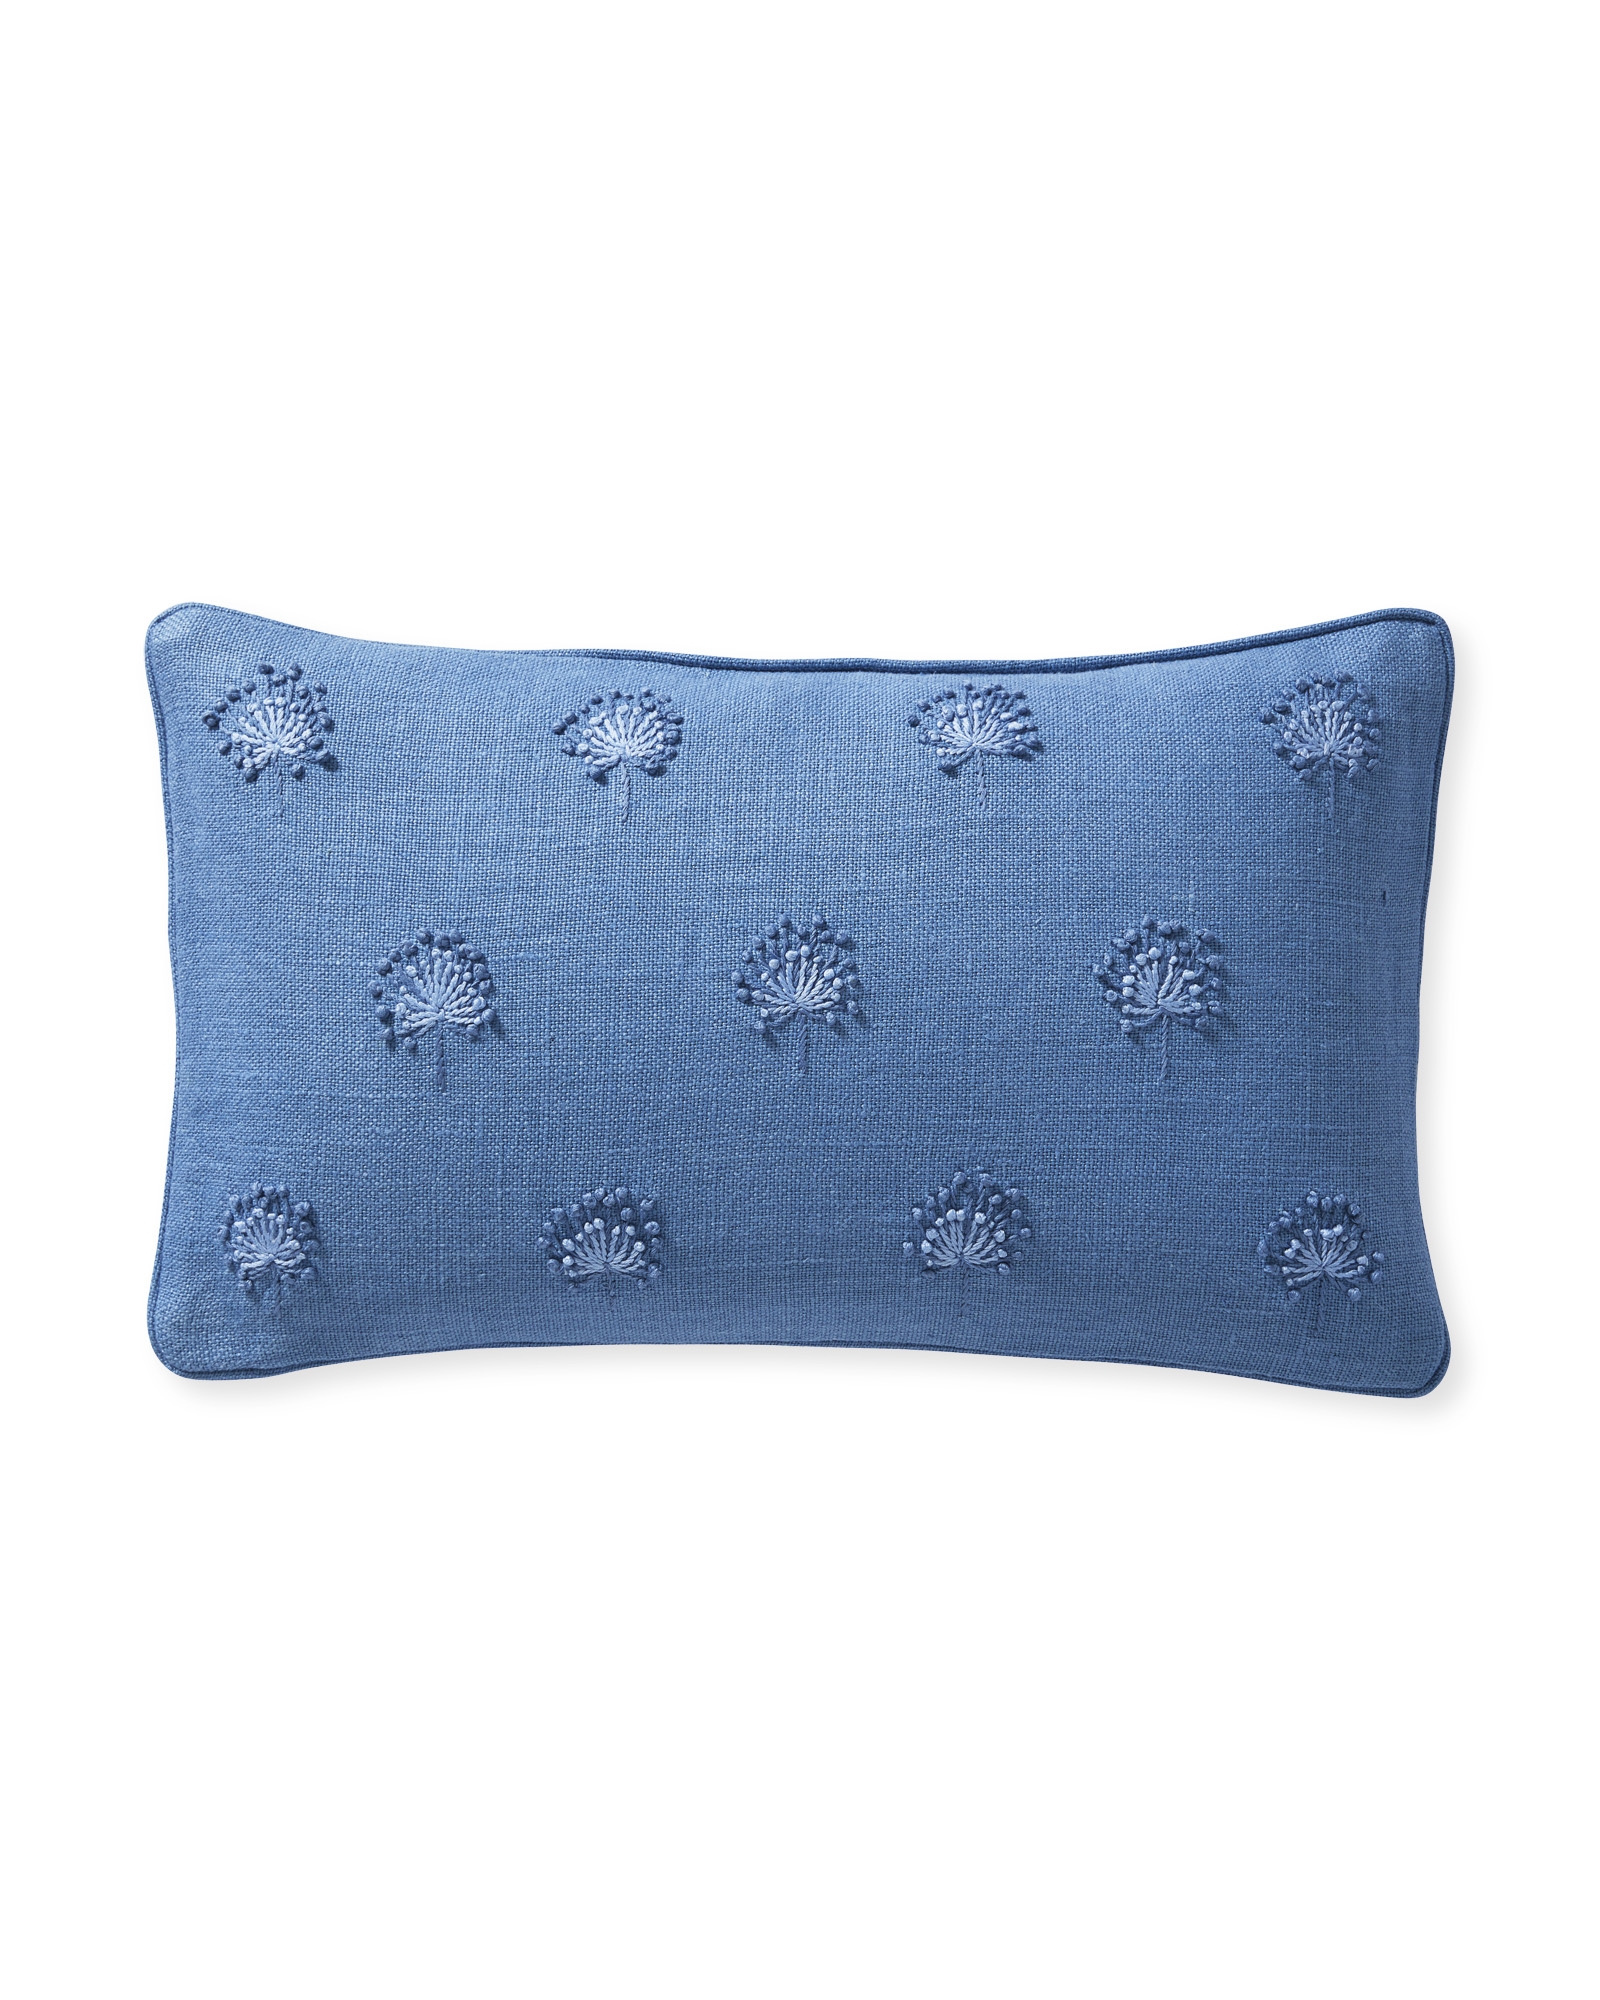 Dandelion Embroidered 12" x 21" Pillow Cover - Harbor - Insert sold separately - Image 0